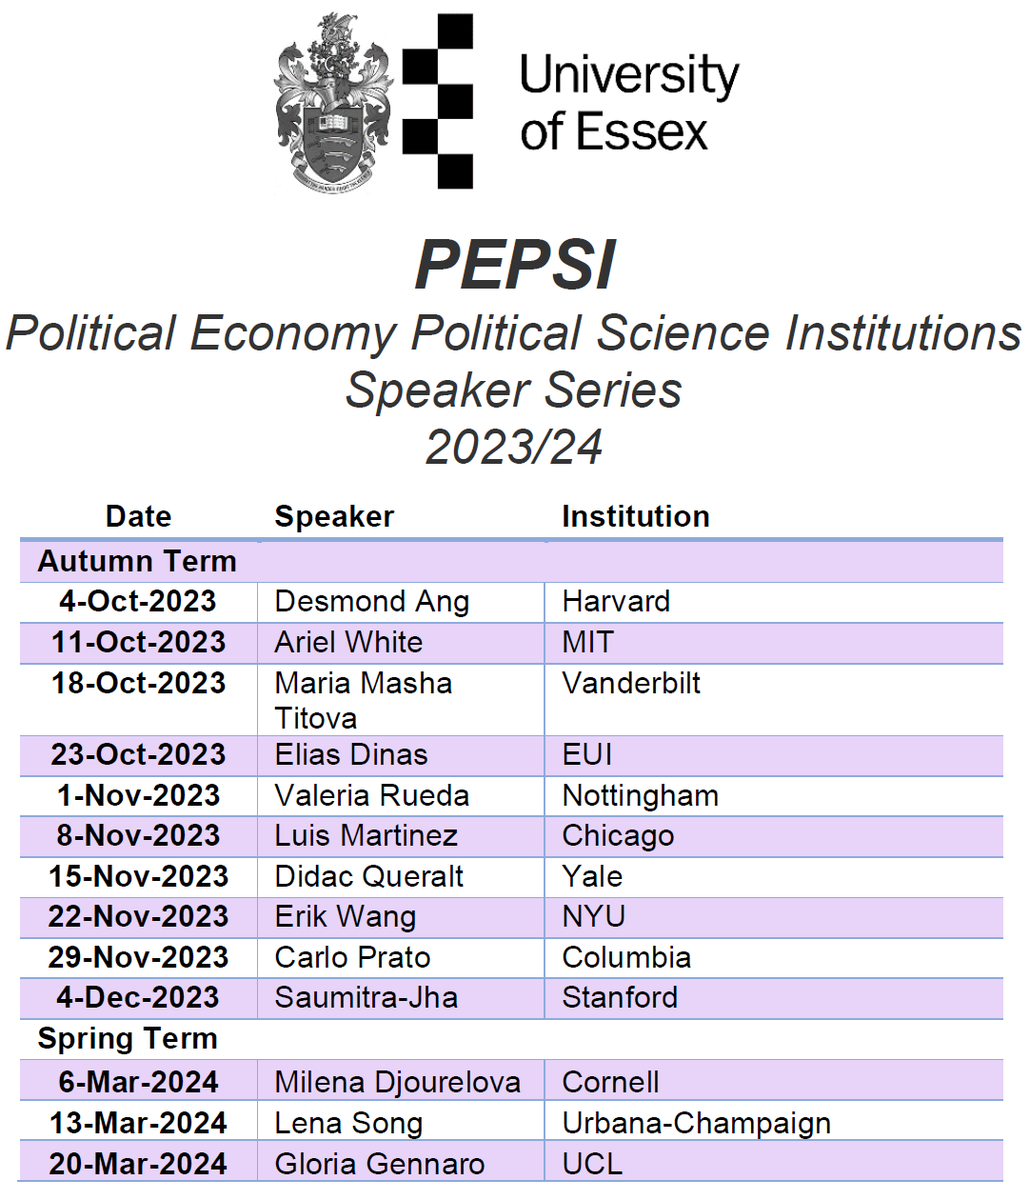 We announce the new PEPSI (Political Economy/Political Science Institutions) in-person seminar series at @uniessexgovt and @UoE_Economics, jointly organized with @Miche_Rosenberg. If you want to attend in person get in touch via email! Great list of speakers!